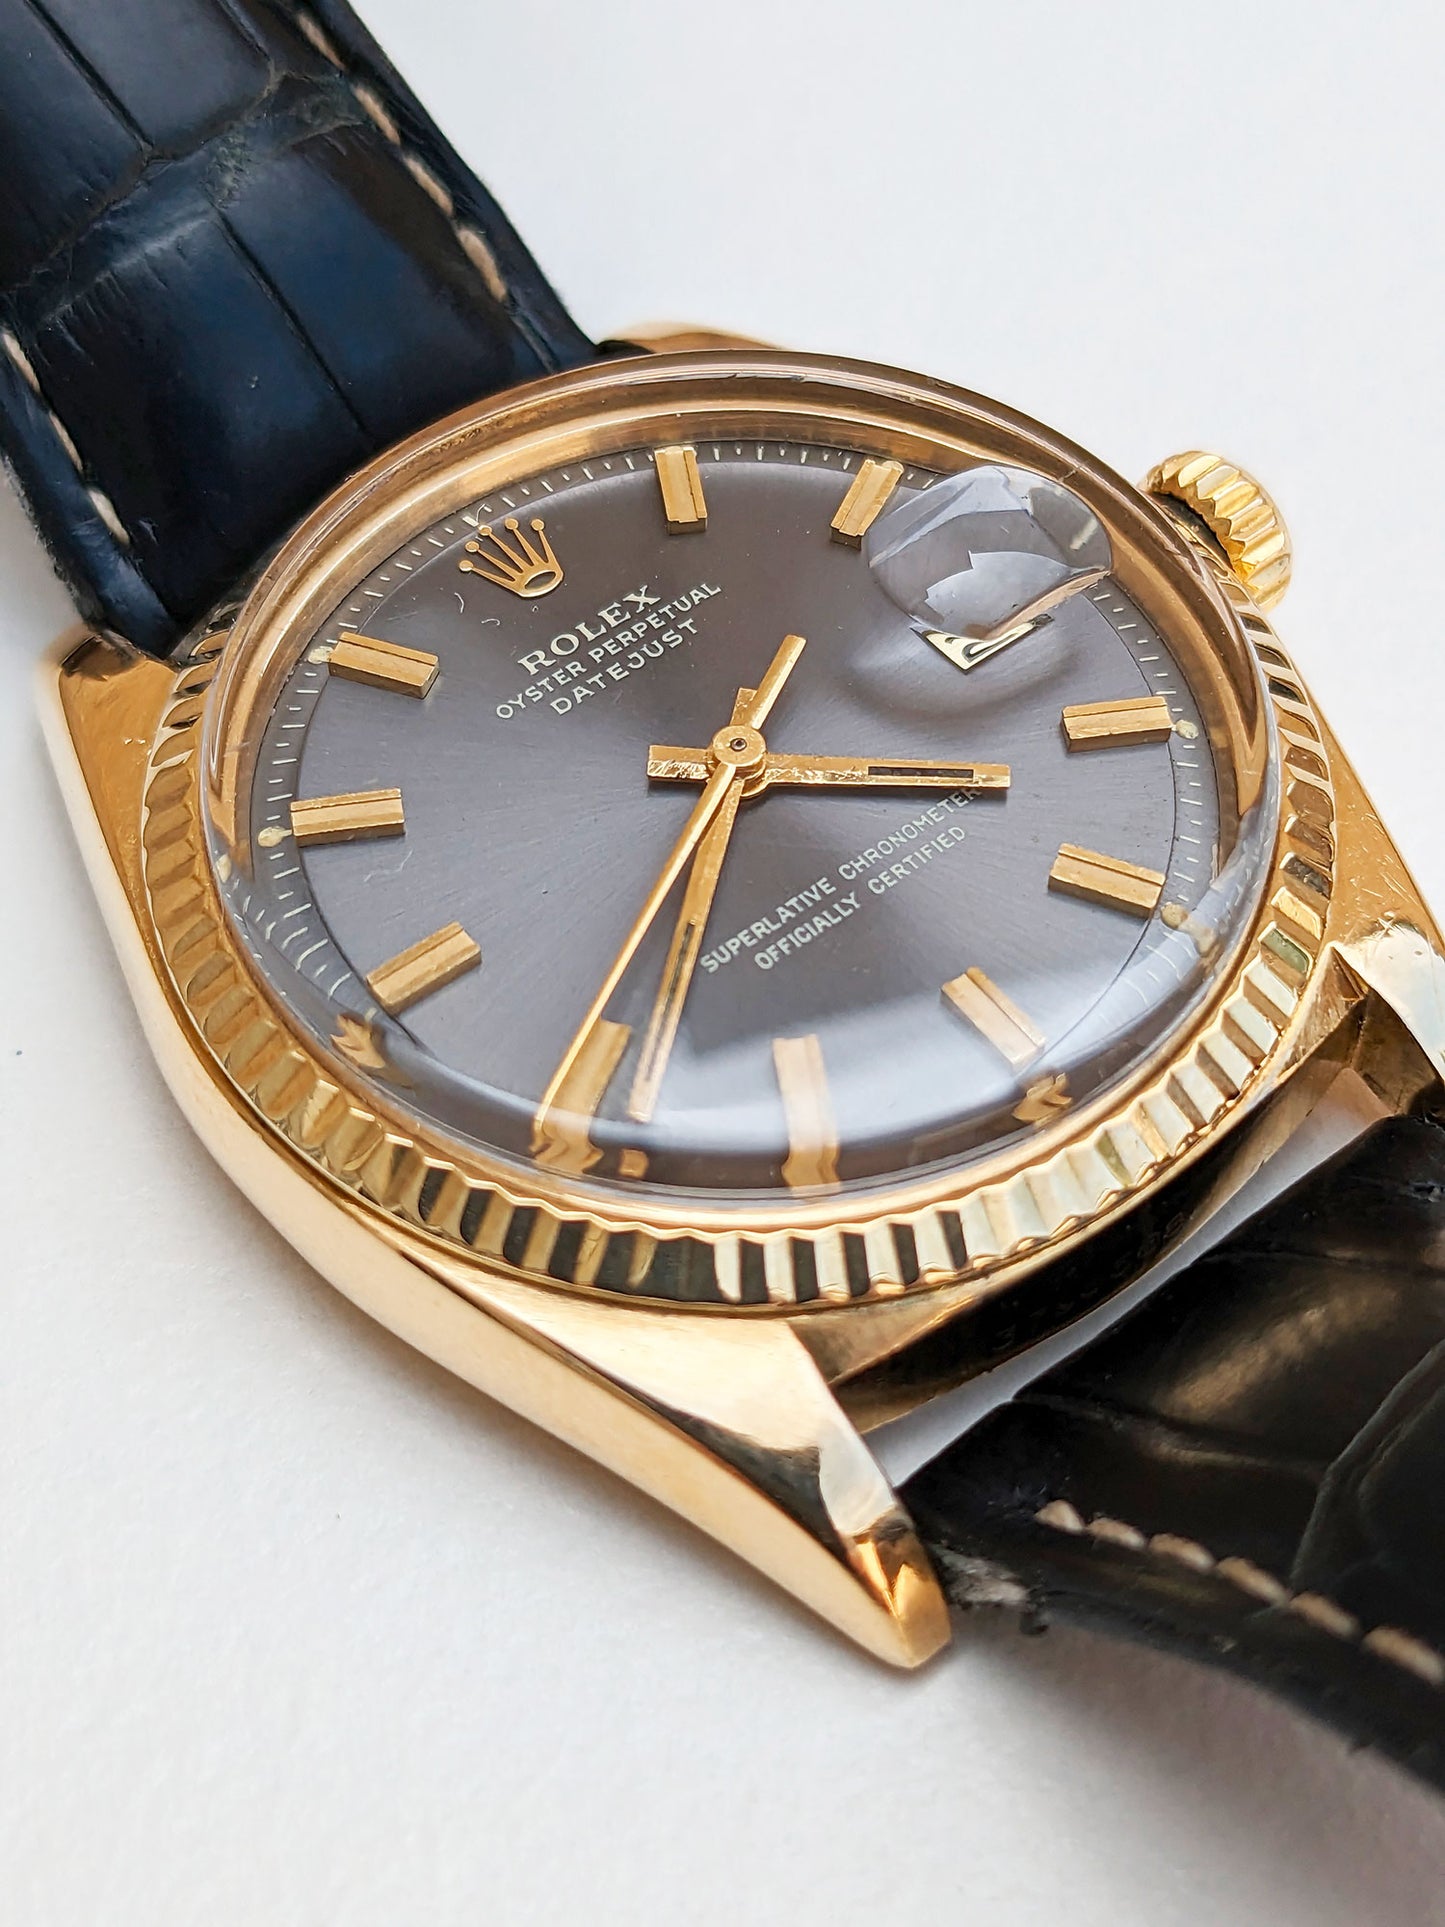 Rolex Oyster Perpetual Datejust Yellow Gold (circa 1980)